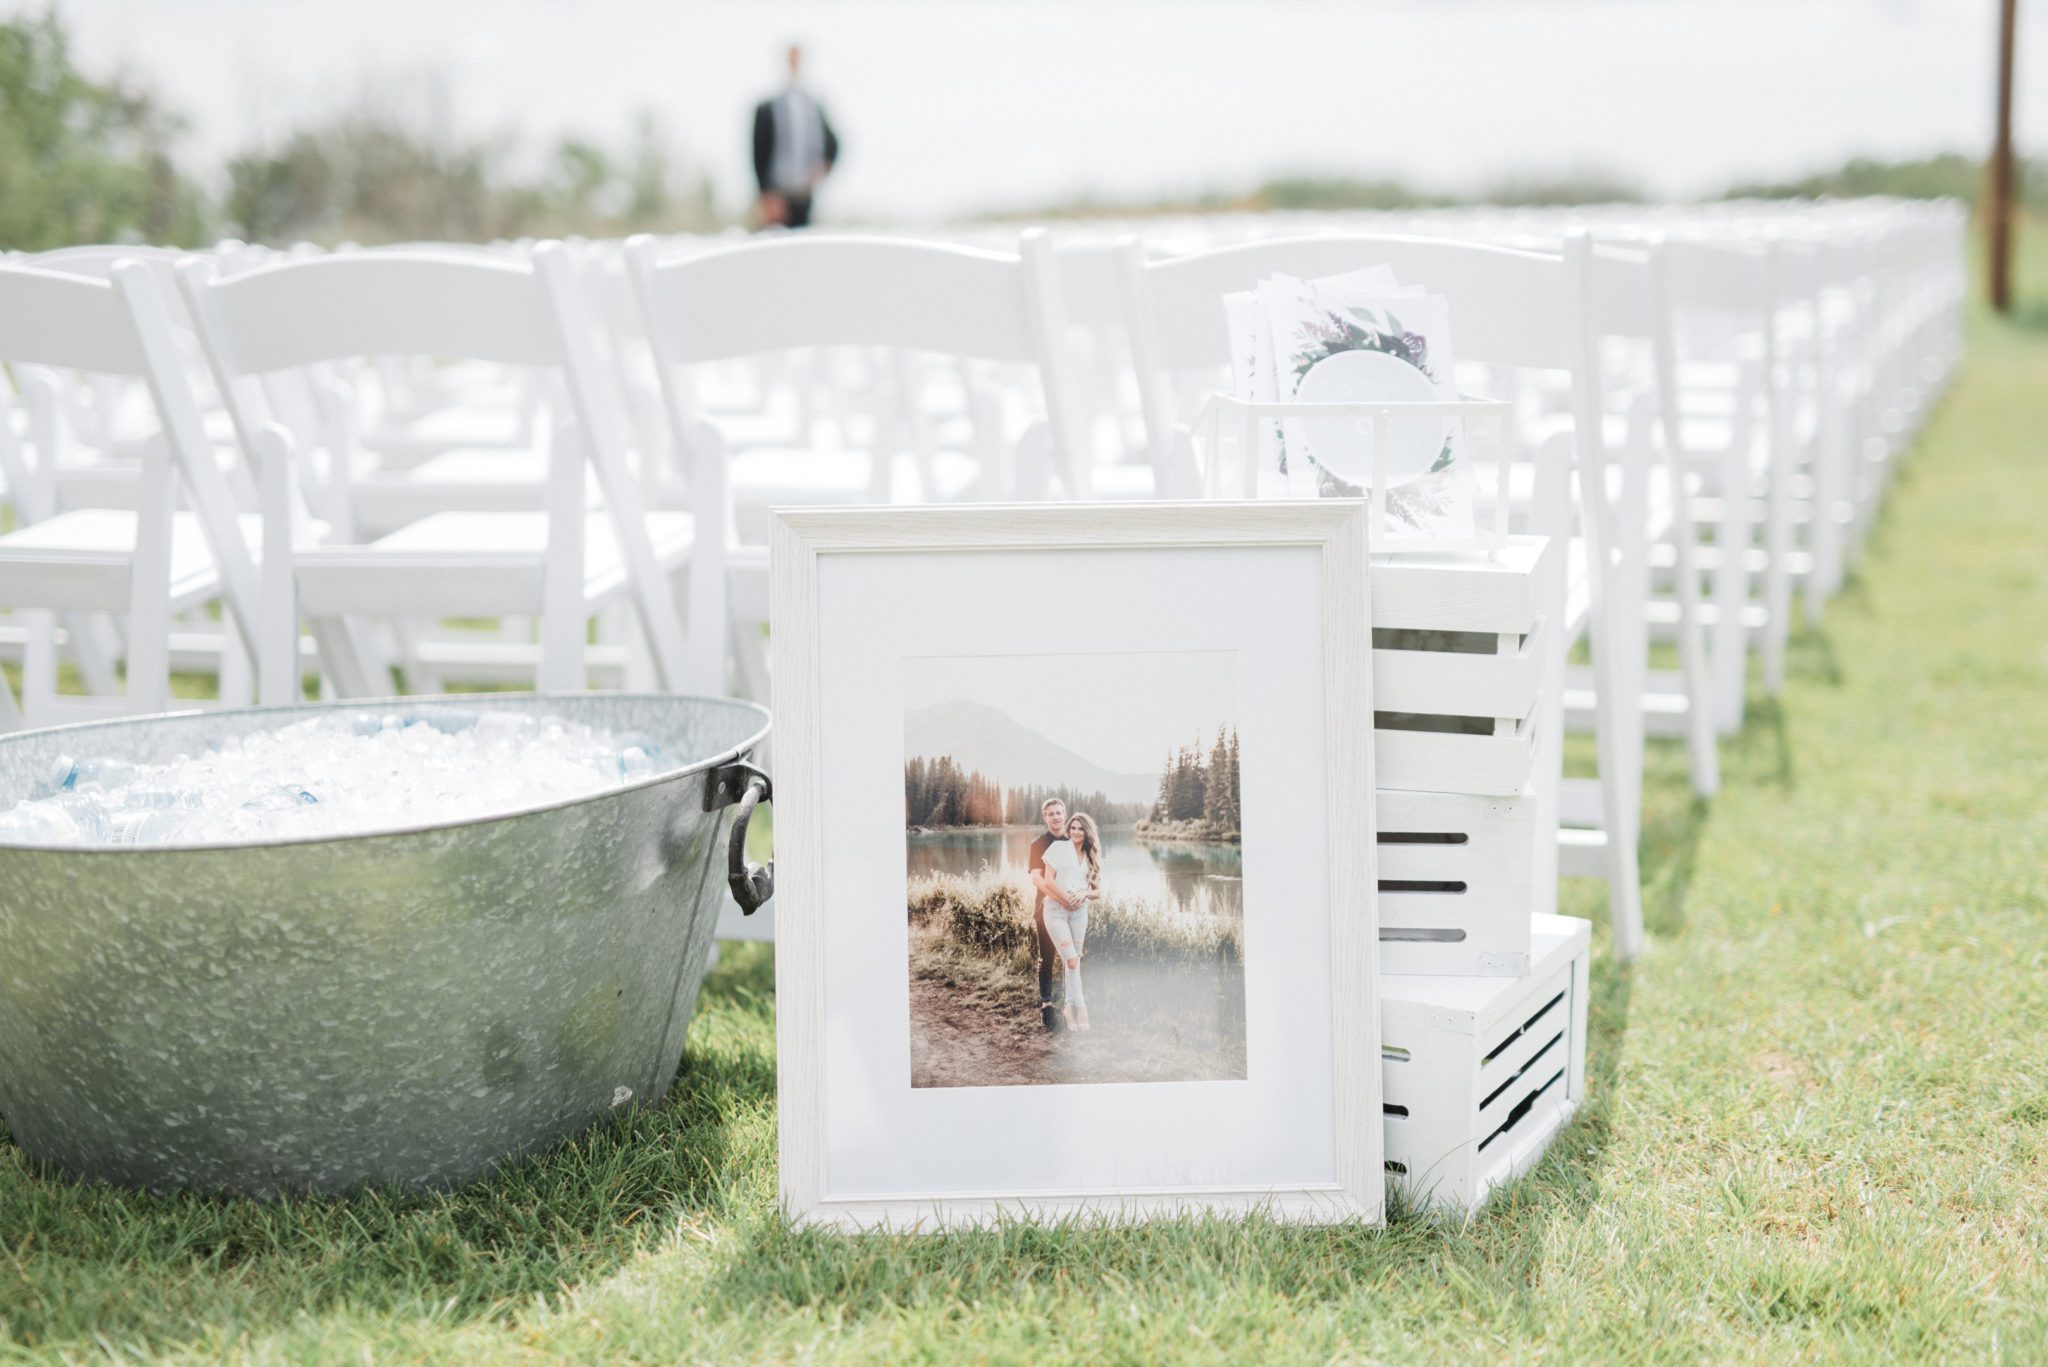 Engagement photos used as decor on a wedding day